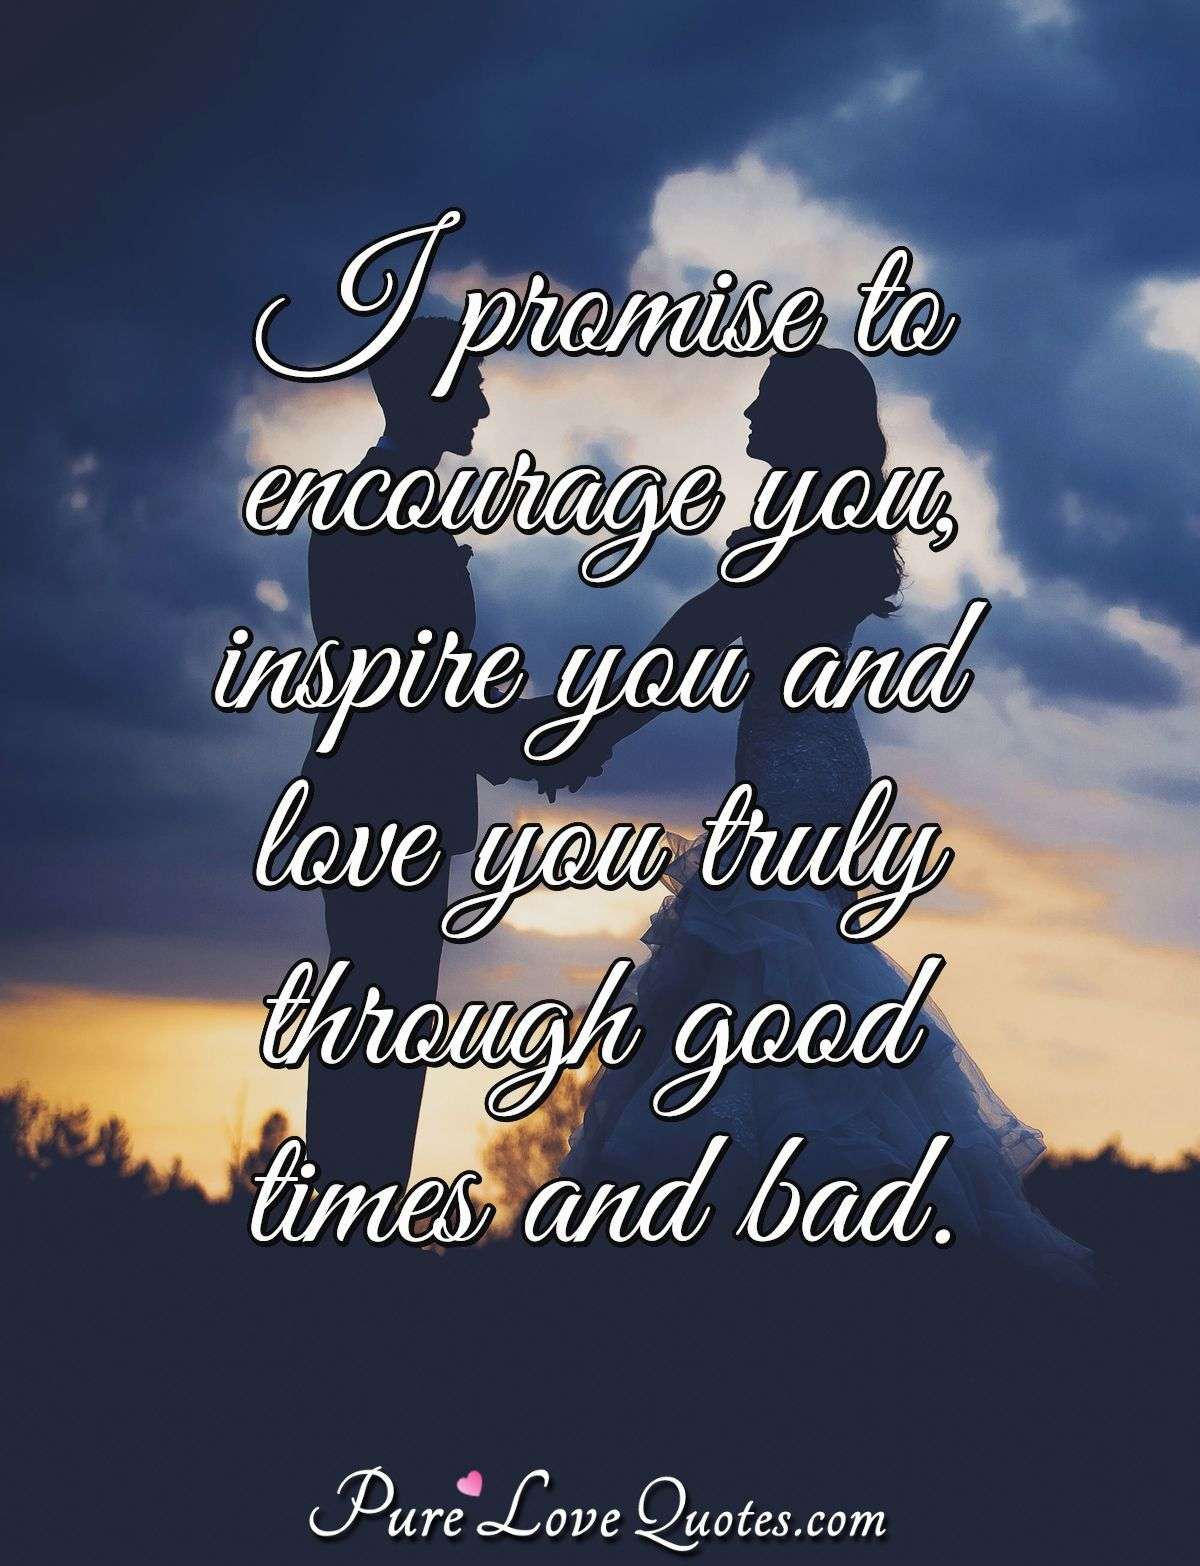 I Promise To Encourage You, Inspire You And Love You Truly Through Good Times... | Purelovequotes